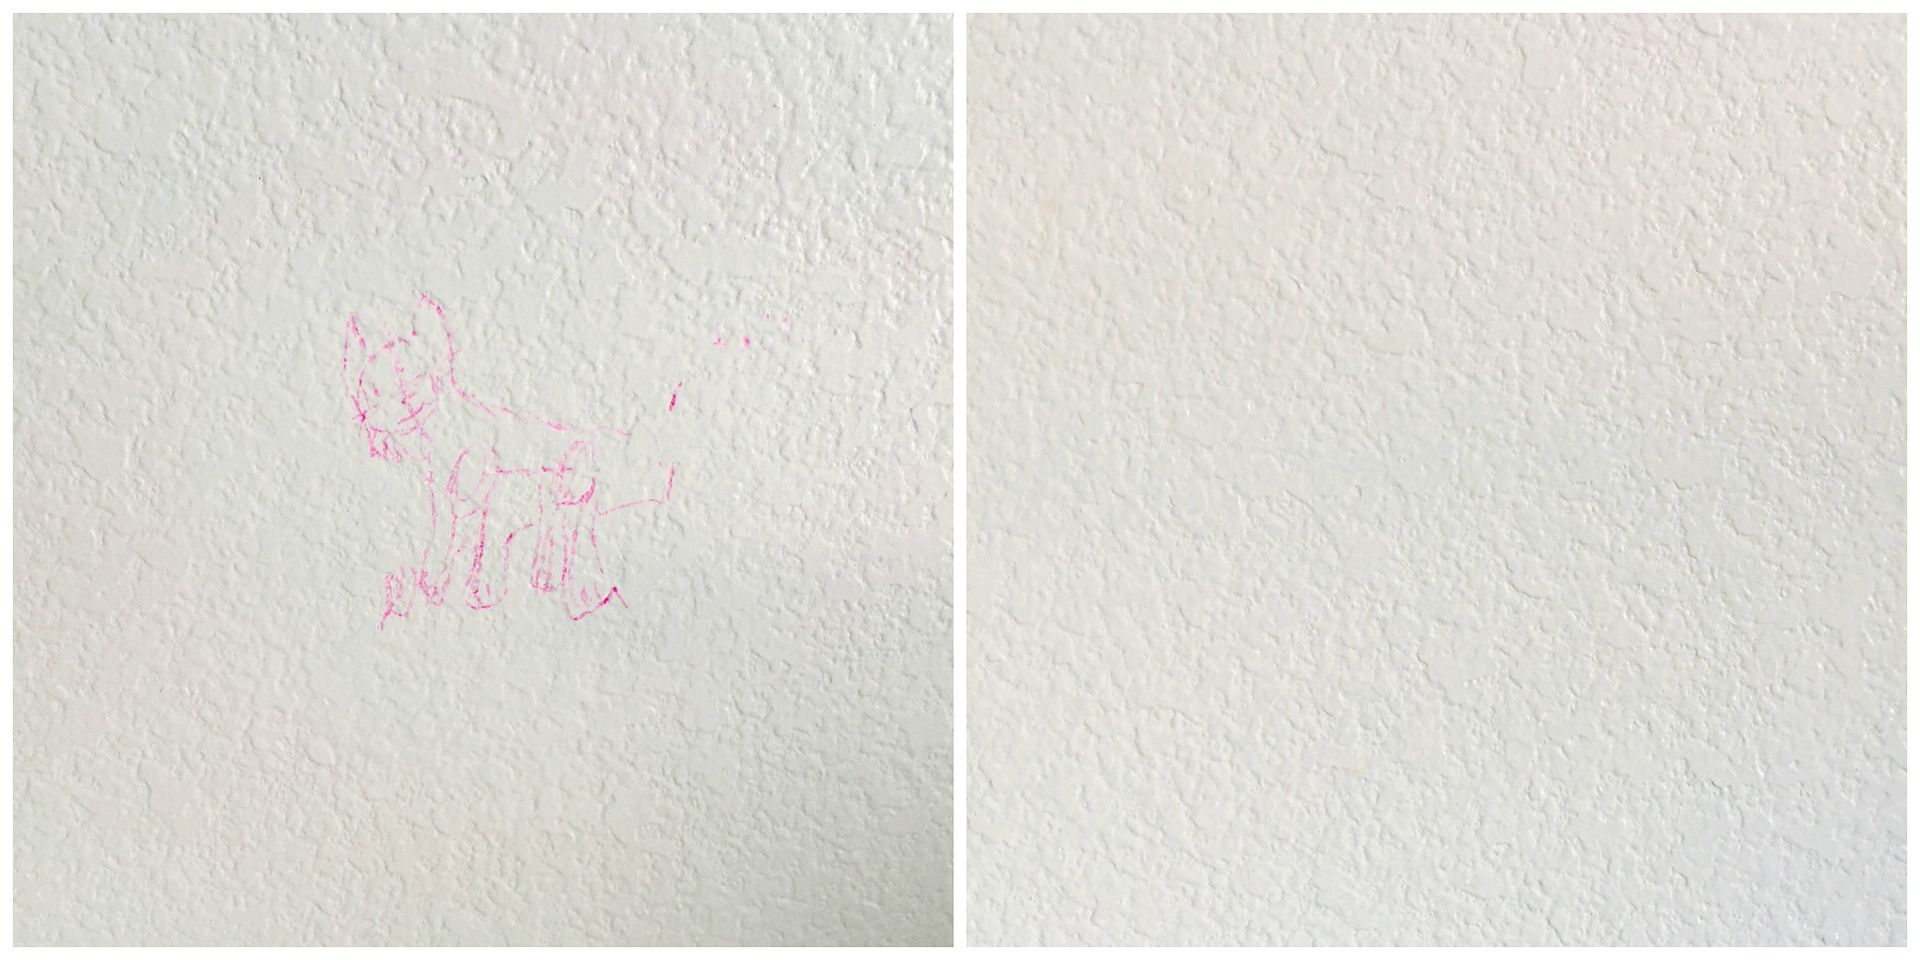 How to get Sharpie off the wall: Two solutions, side-by-side